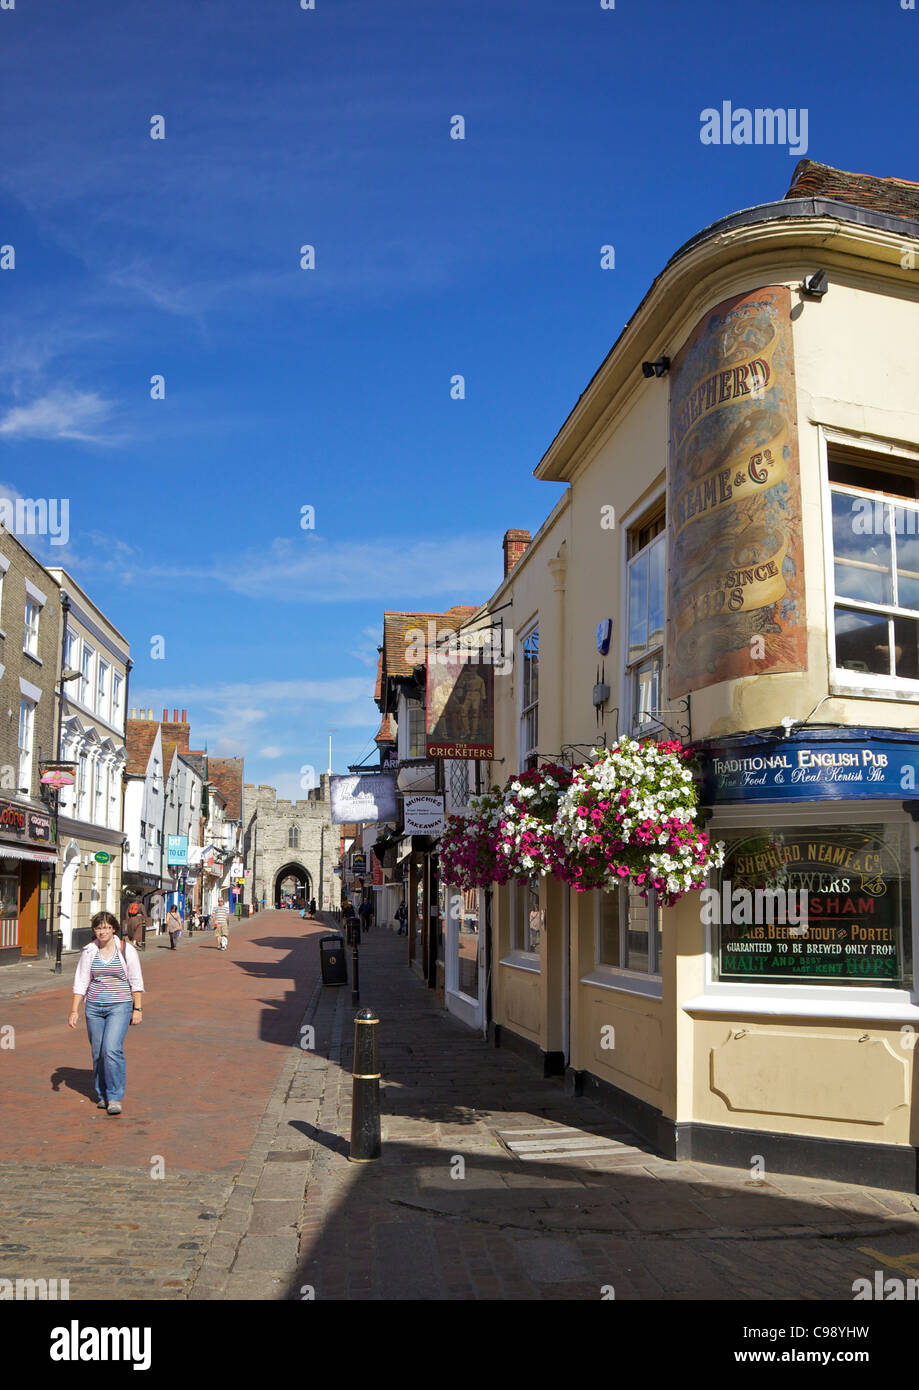 The Cricketers pub, St Peters Street, looking to Westgate, Canterbury, Kent, England, UK, United Kingdom, GB, Great Britain, Bri Stock Photo